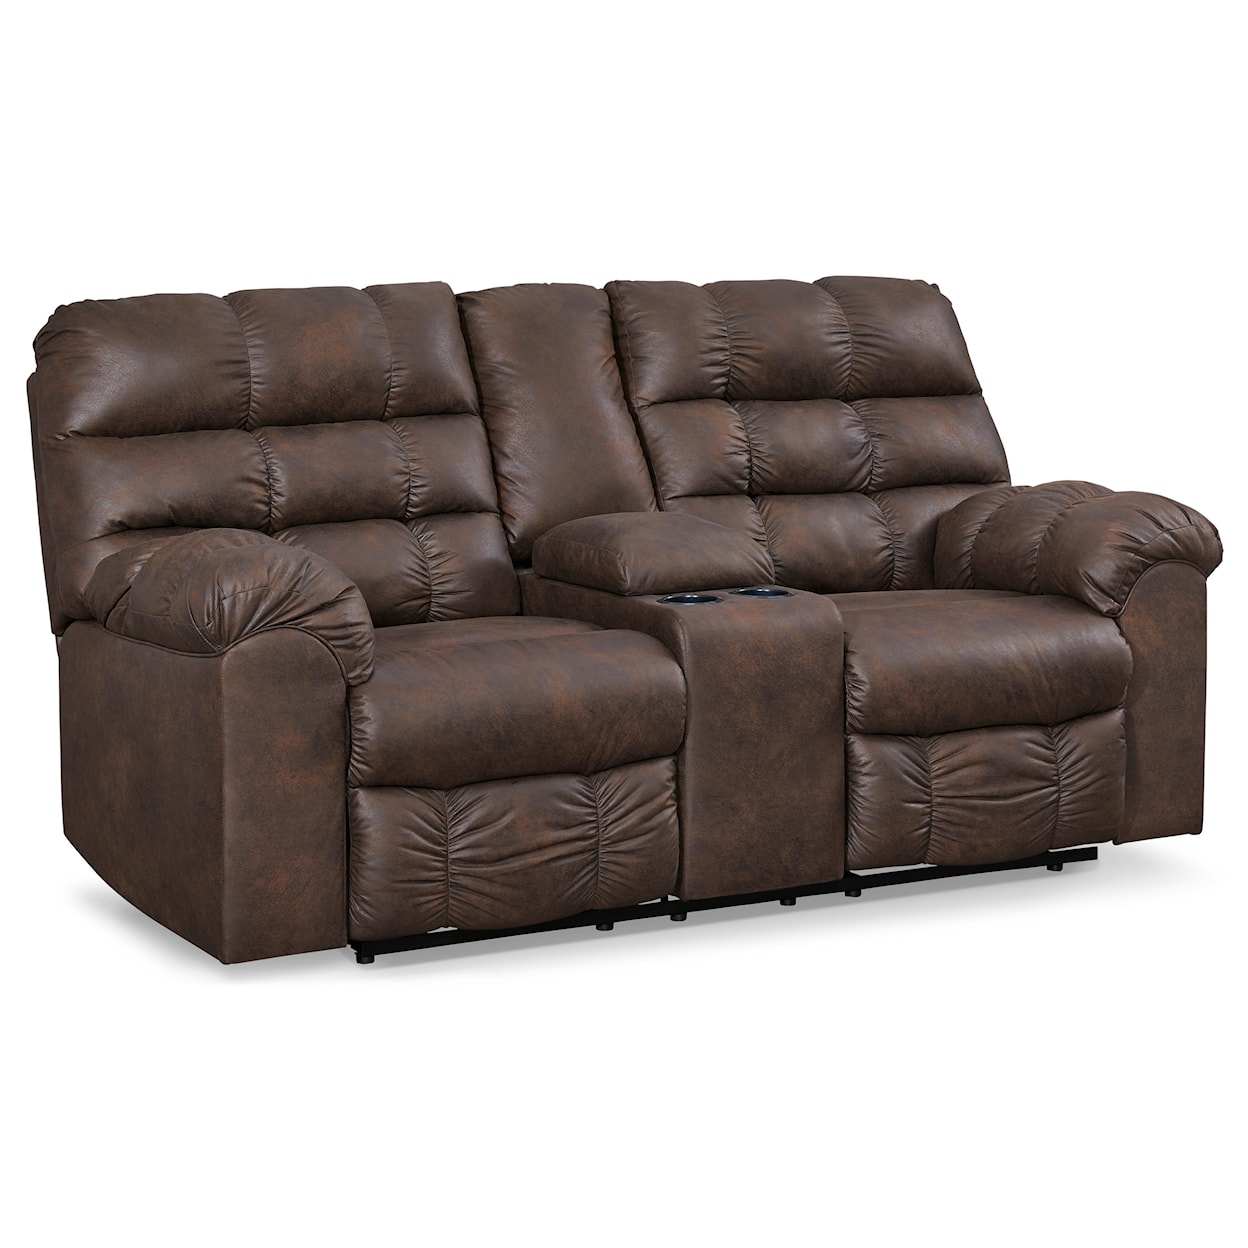 Signature Design by Ashley Furniture Derwin Reclining Loveseat with Console